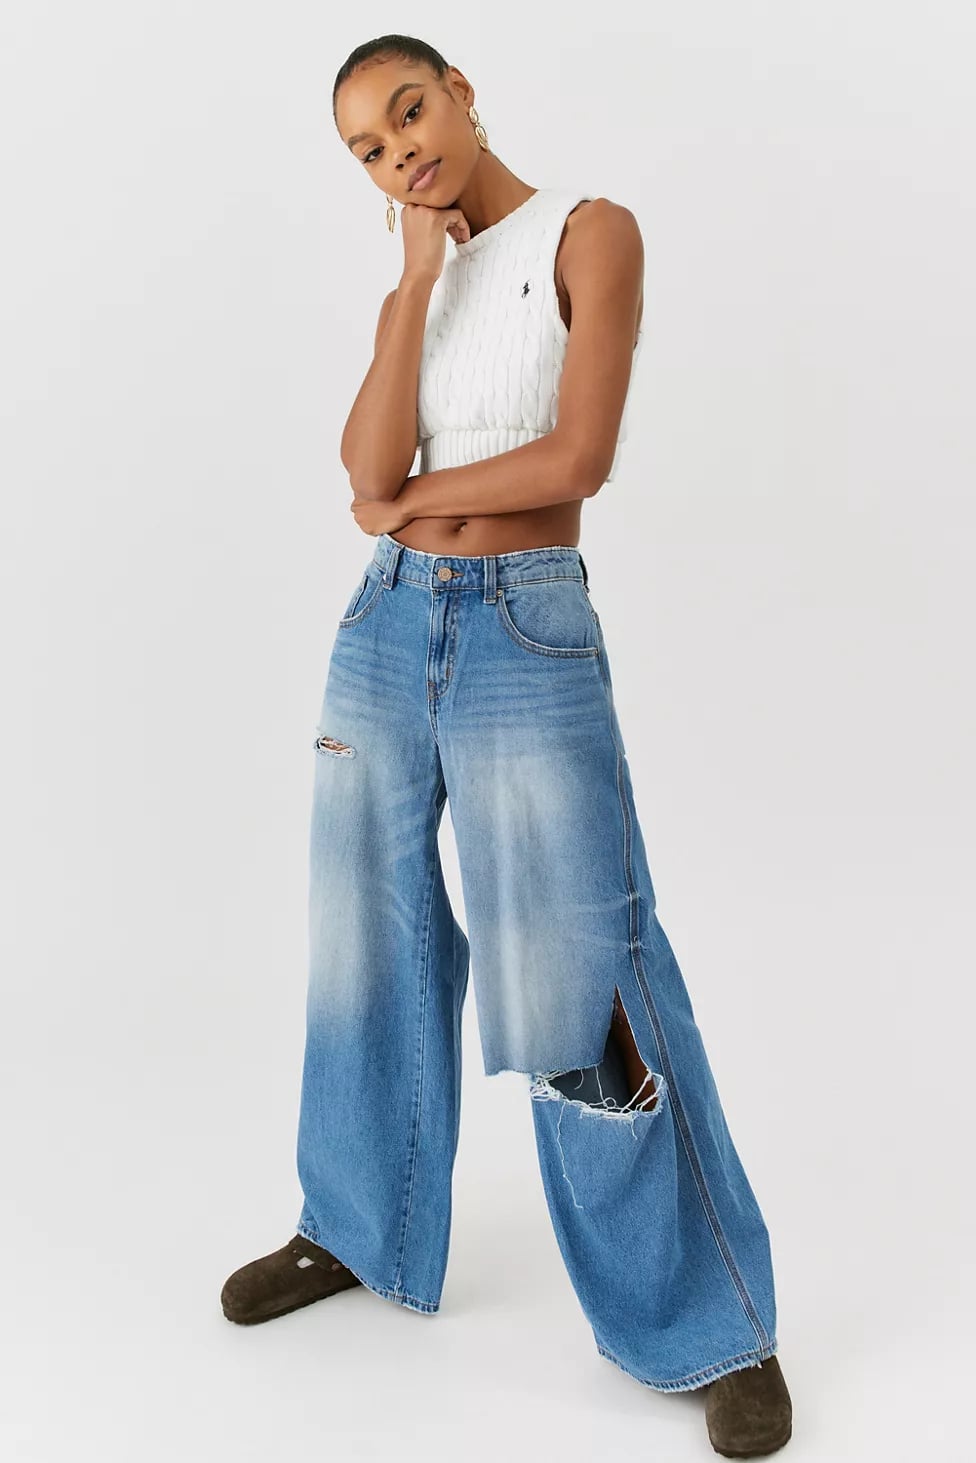 Aktualisieren 87+ urban outfitters bdg ripped jeans neueste ...